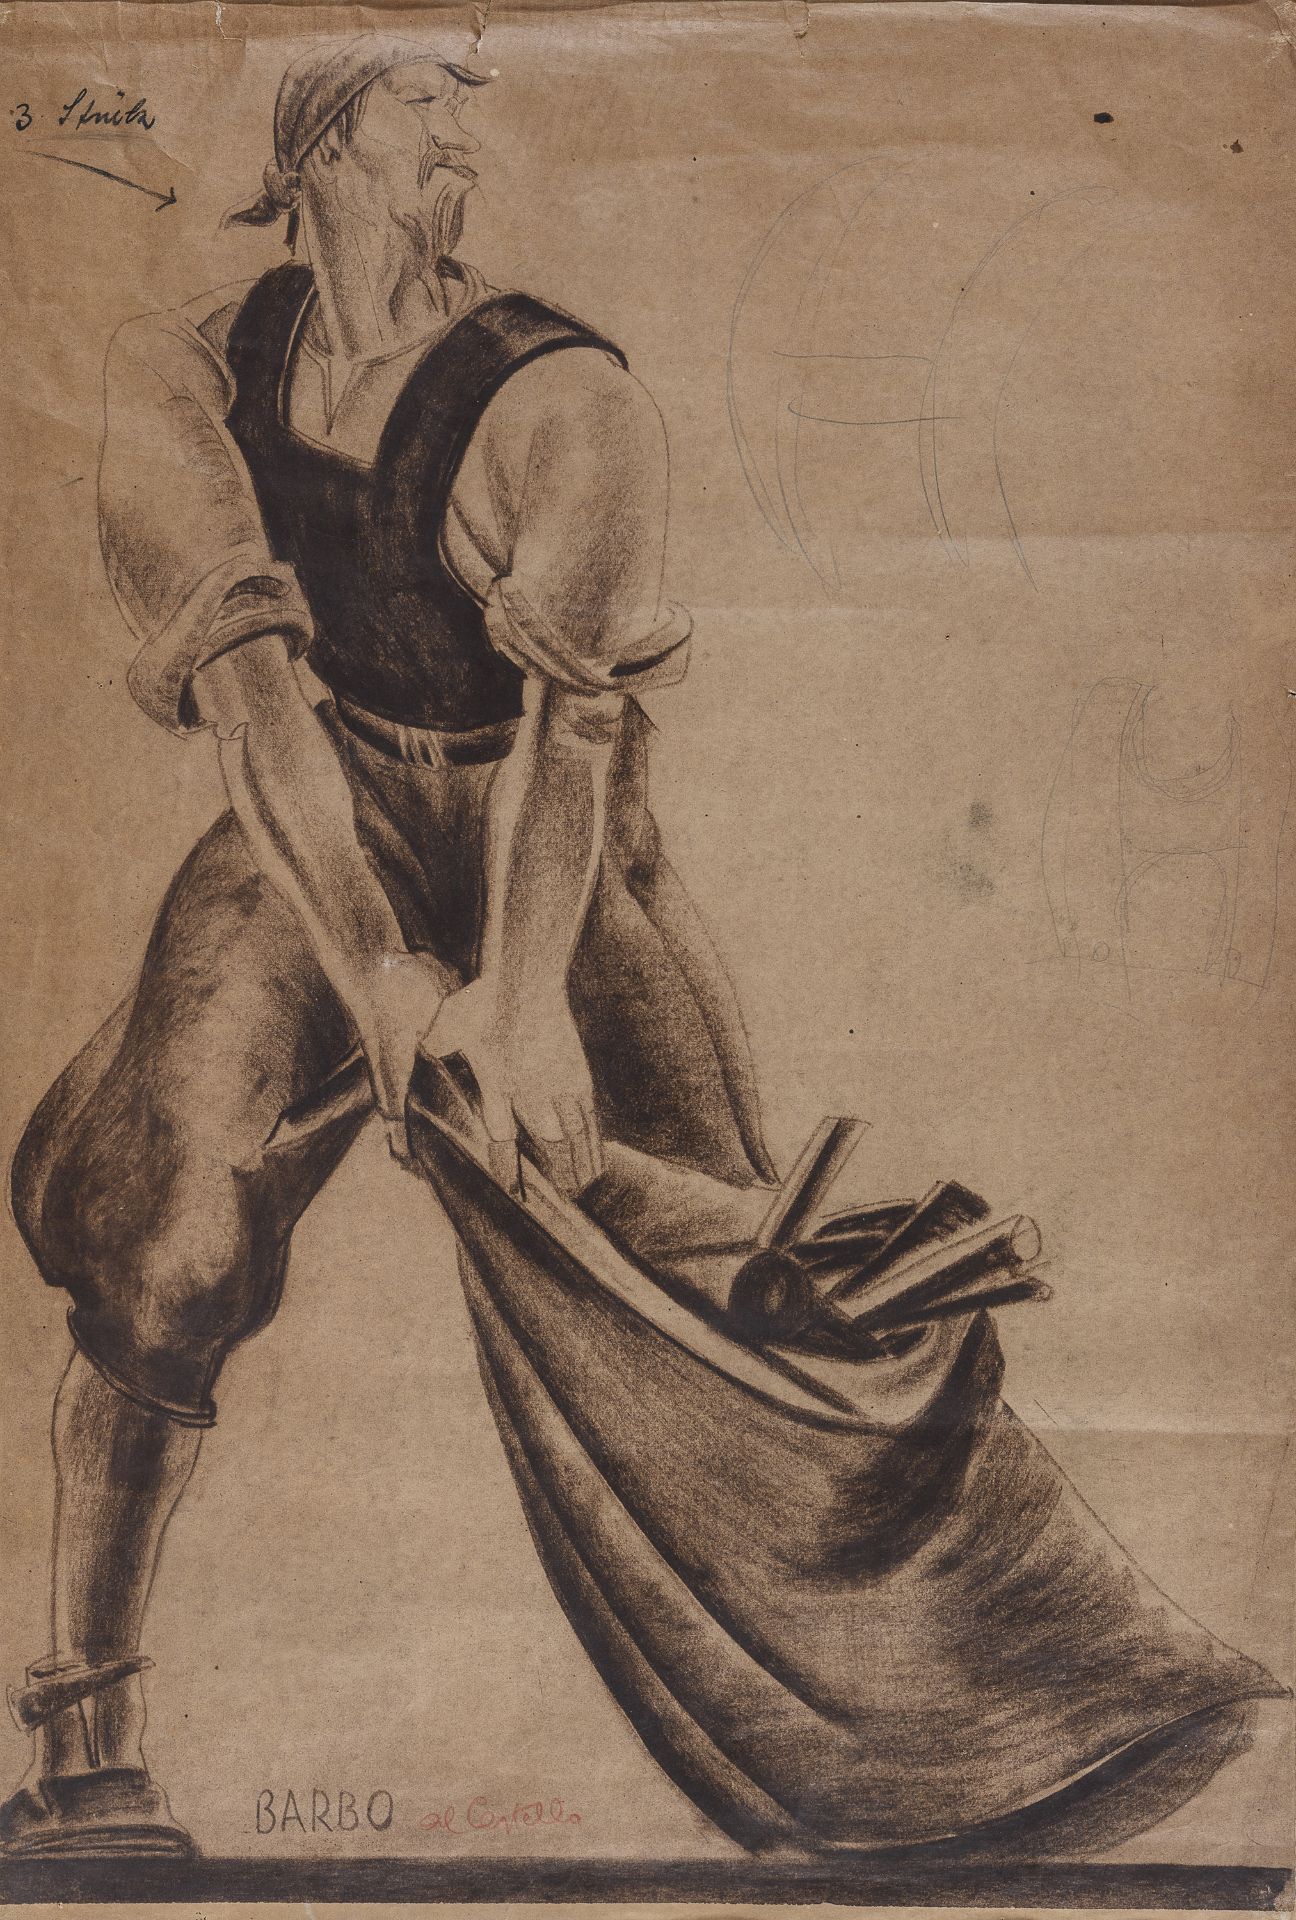 CHARCOAL DRAWING OF BARBO BY VIRGILIO MARCHI 1930s